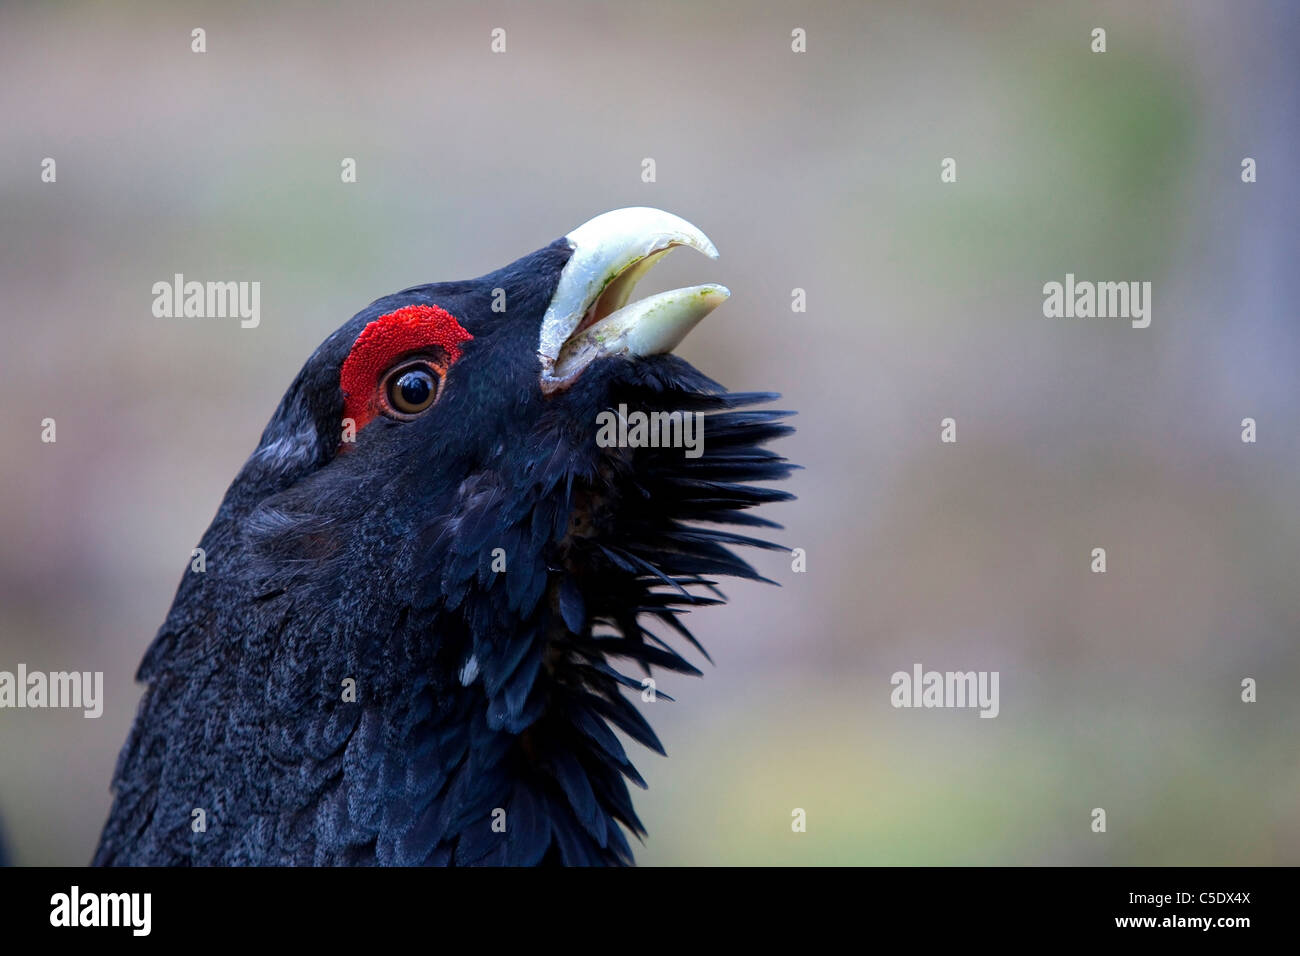 Close-up of a Capercaillie bird looking up against blurred background Stock Photo